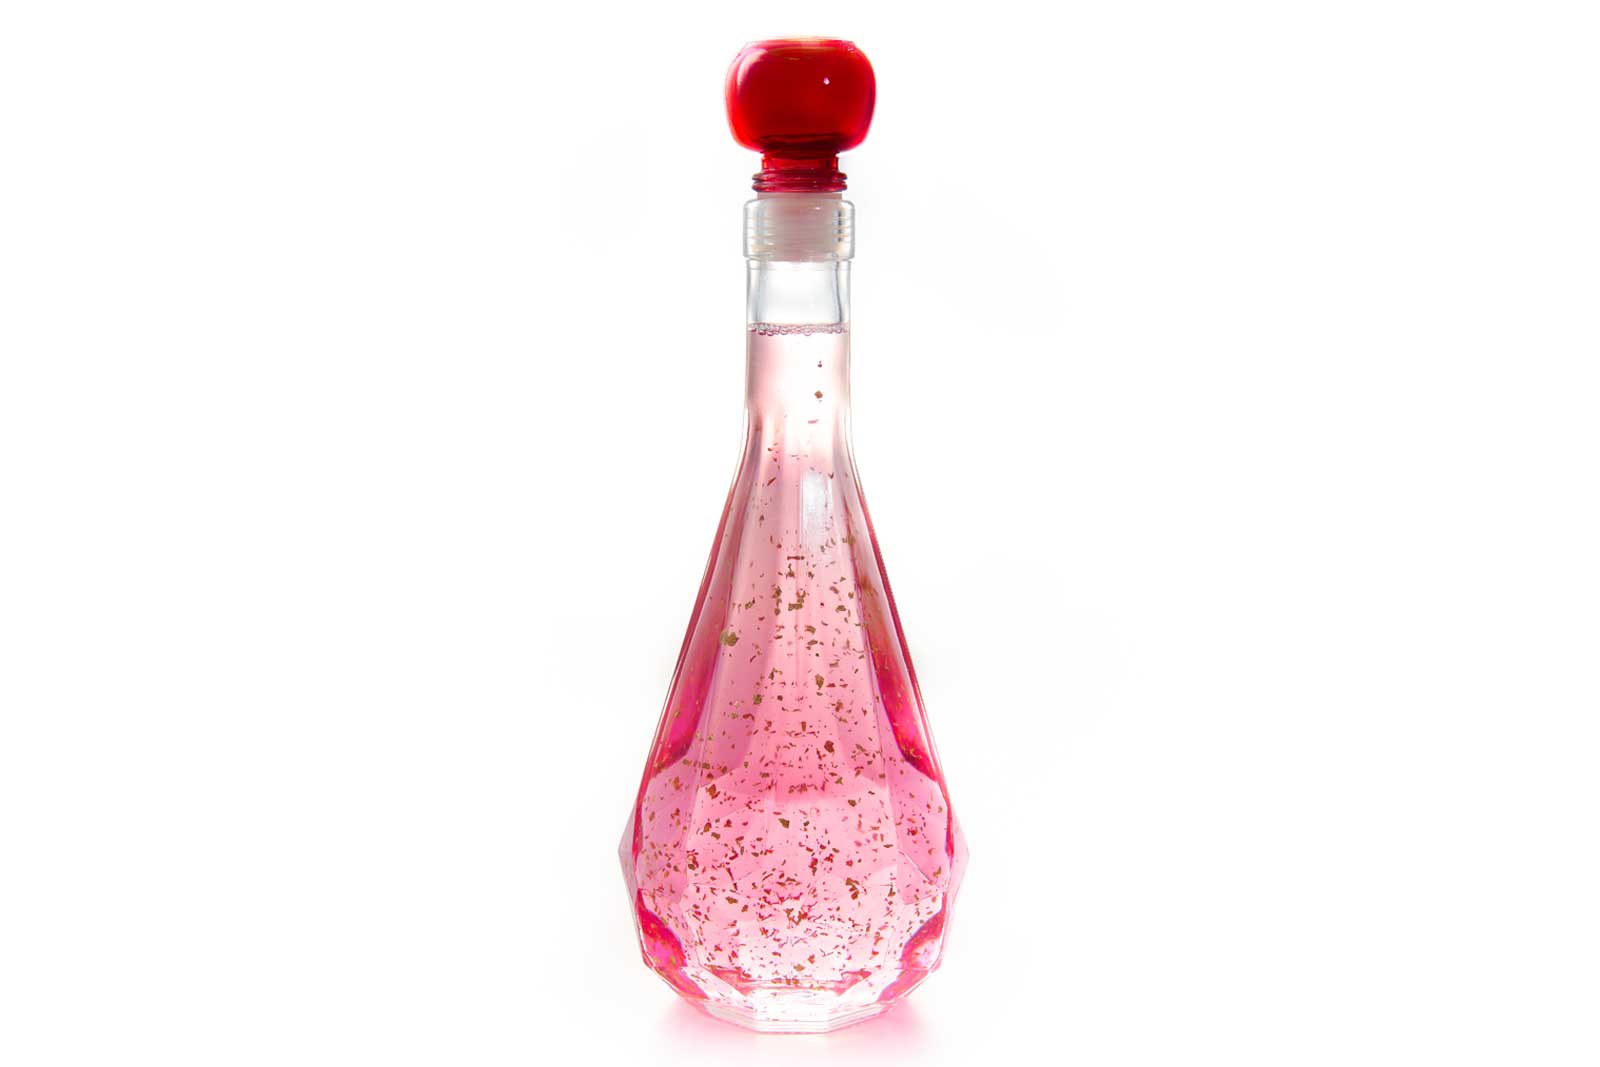 PINK GIN GIFT - CRYSTAL SHAPED GLASS BOTTLE WITH 22 CARAT GOLD FLAKES - 500ML - 20%